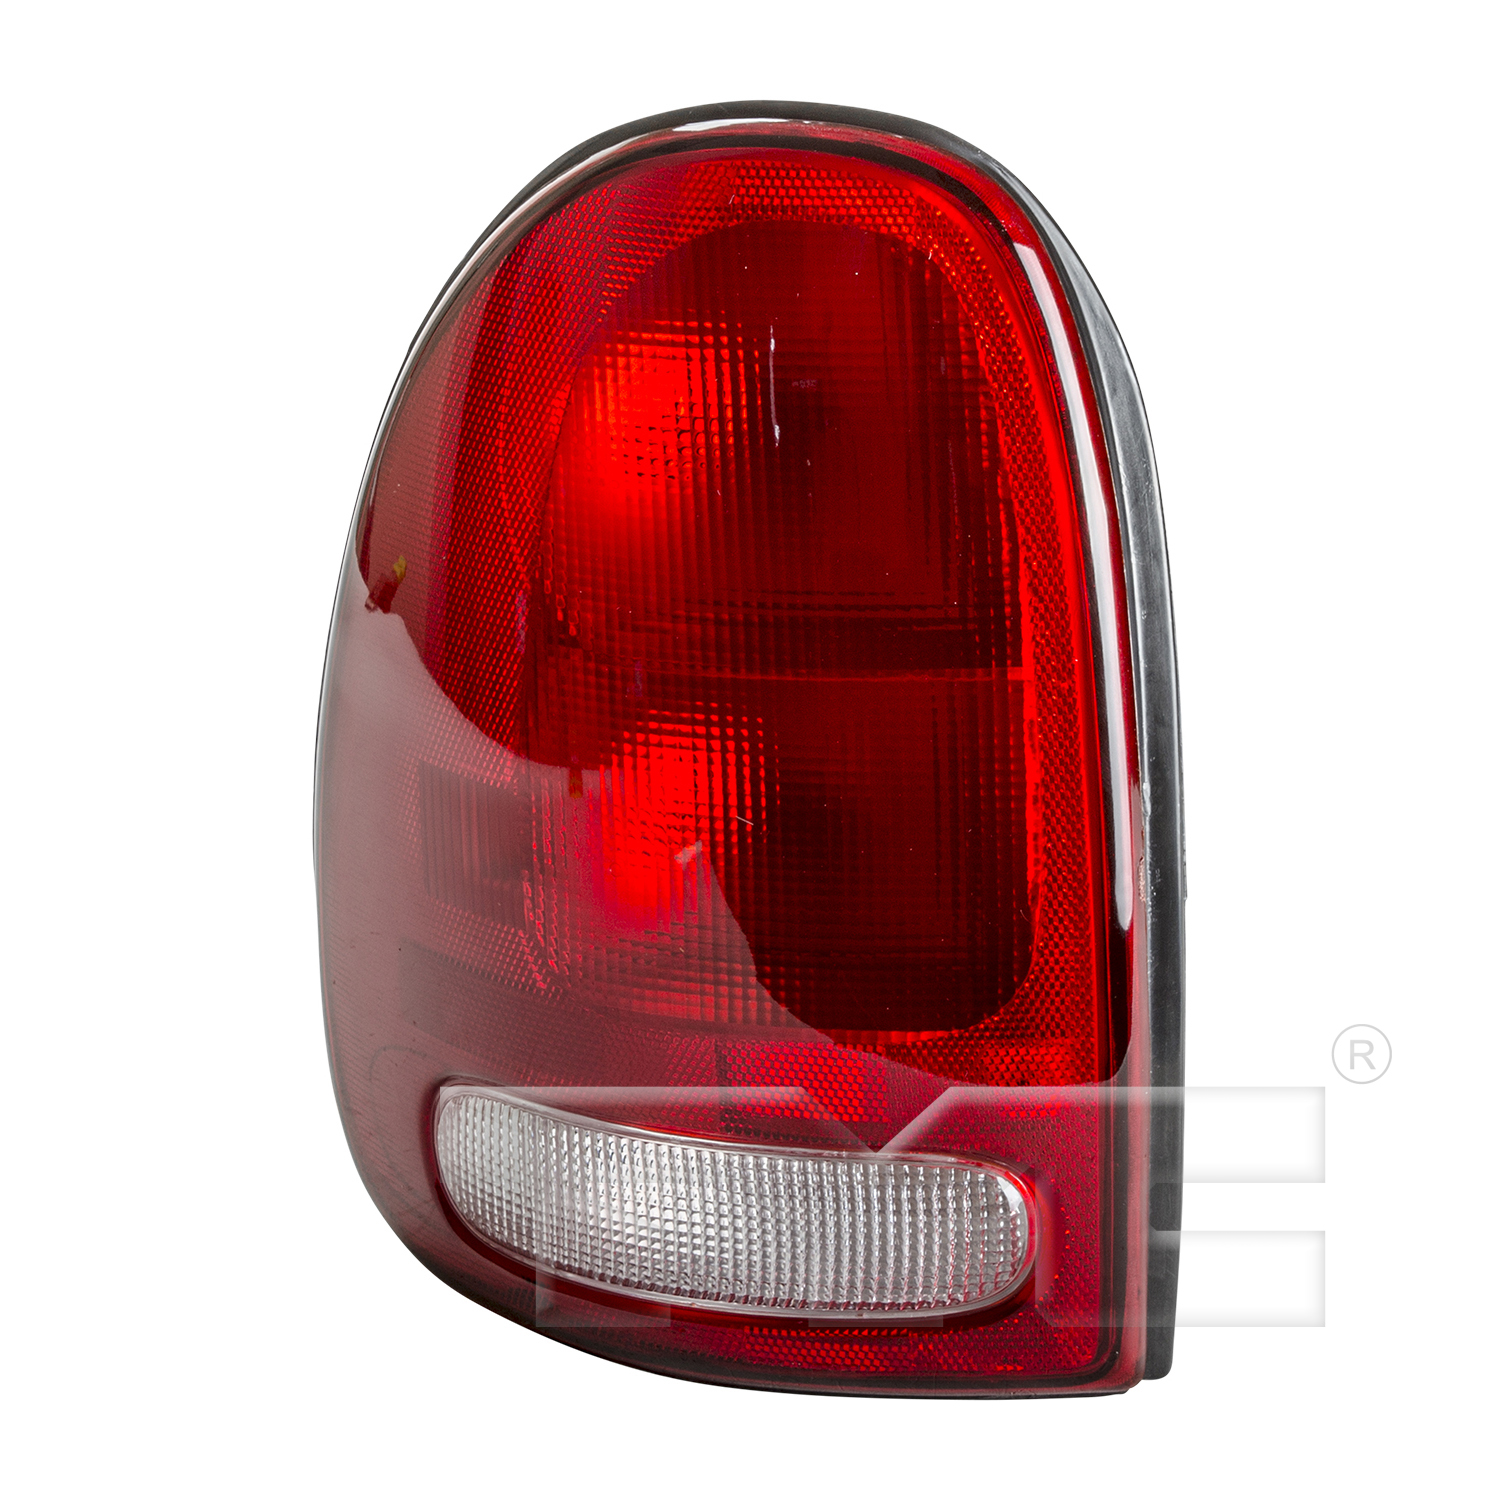 Aftermarket TAILLIGHTS for CHRYSLER - TOWN & COUNTRY, TOWN & COUNTRY,96-00,LT Taillamp assy